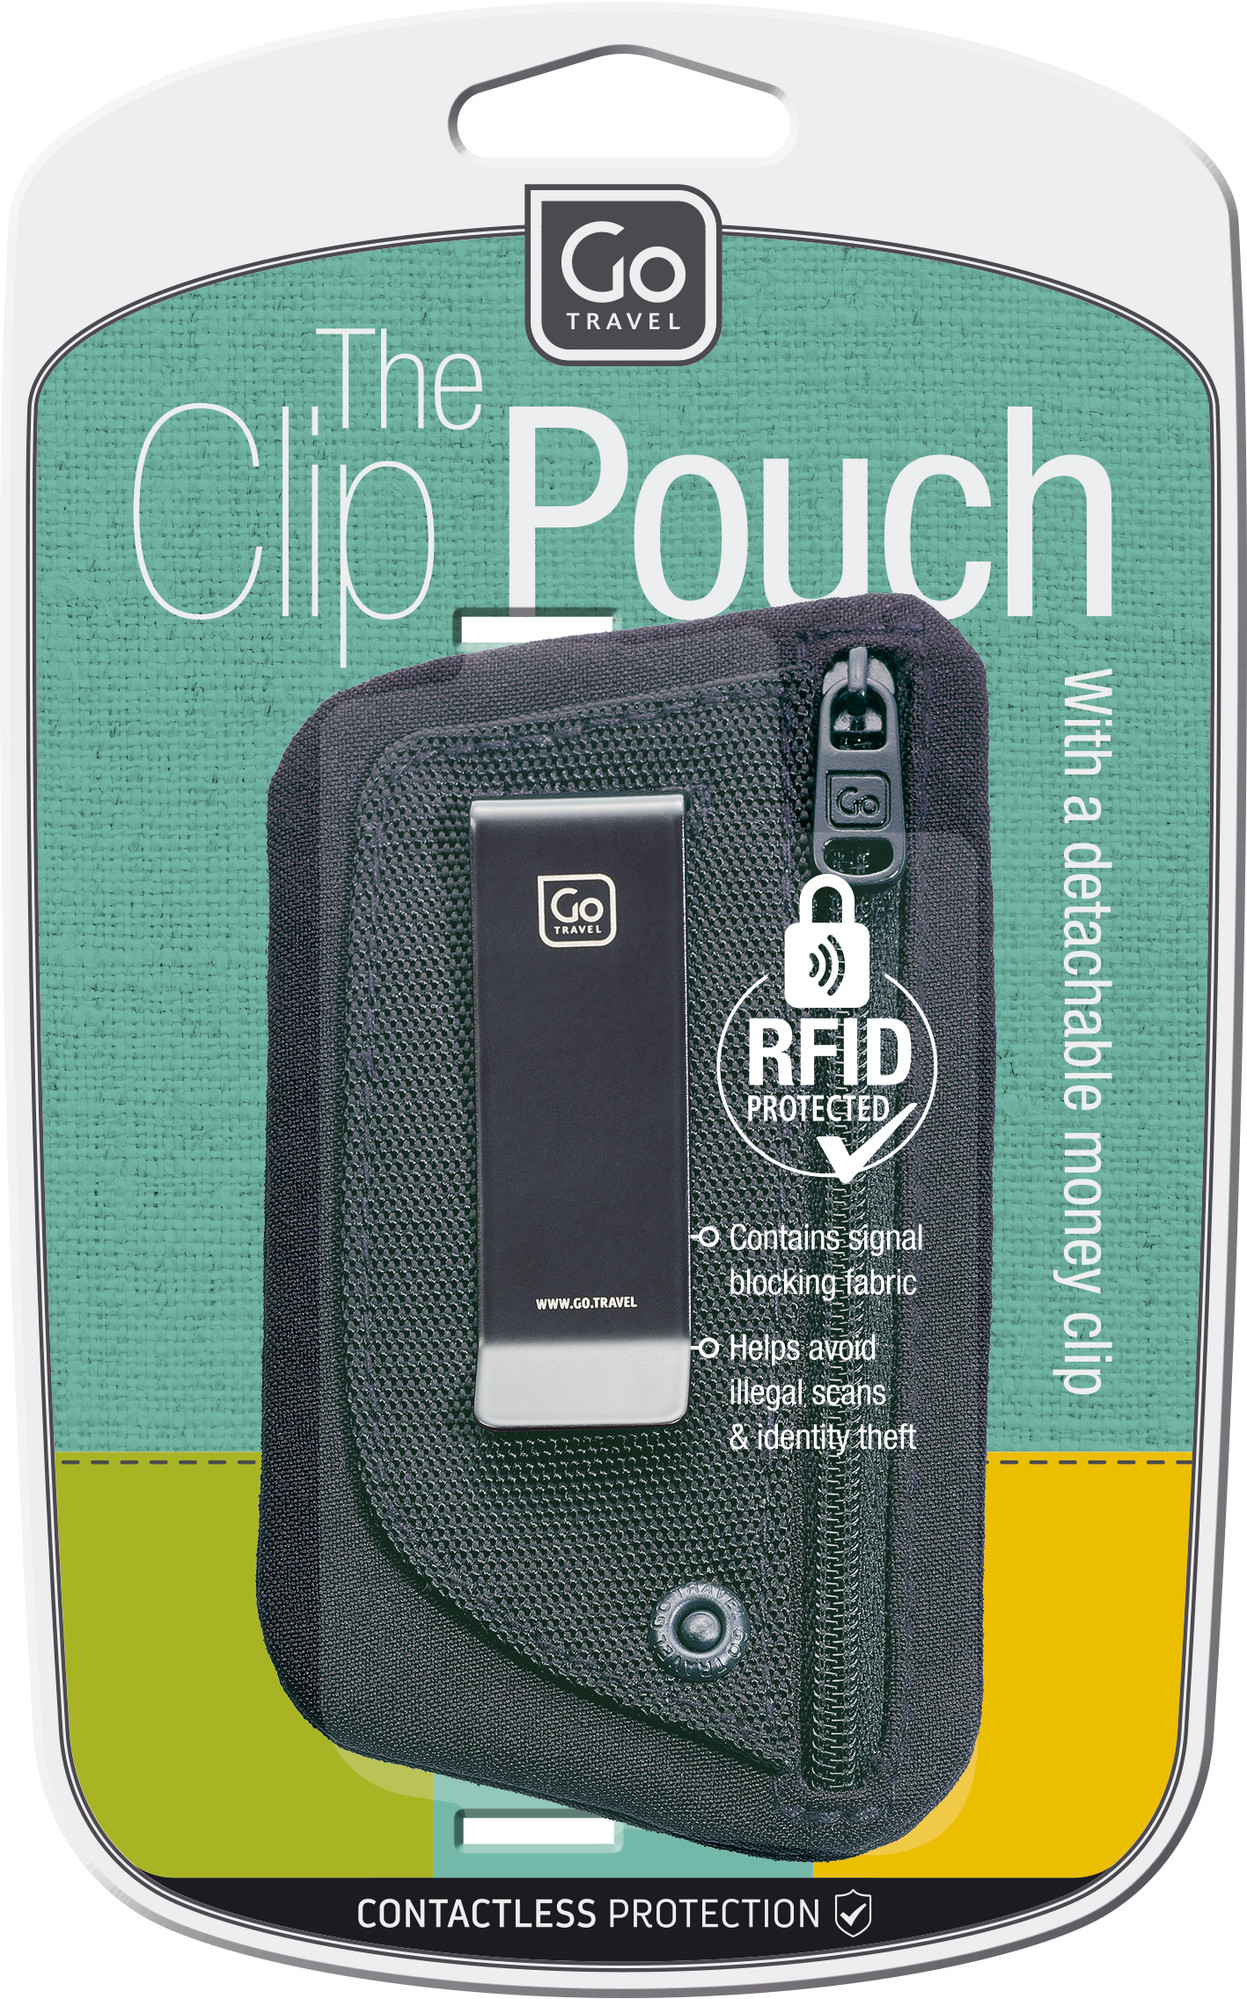 Picture of Go Travel The Clip Pouch RFID